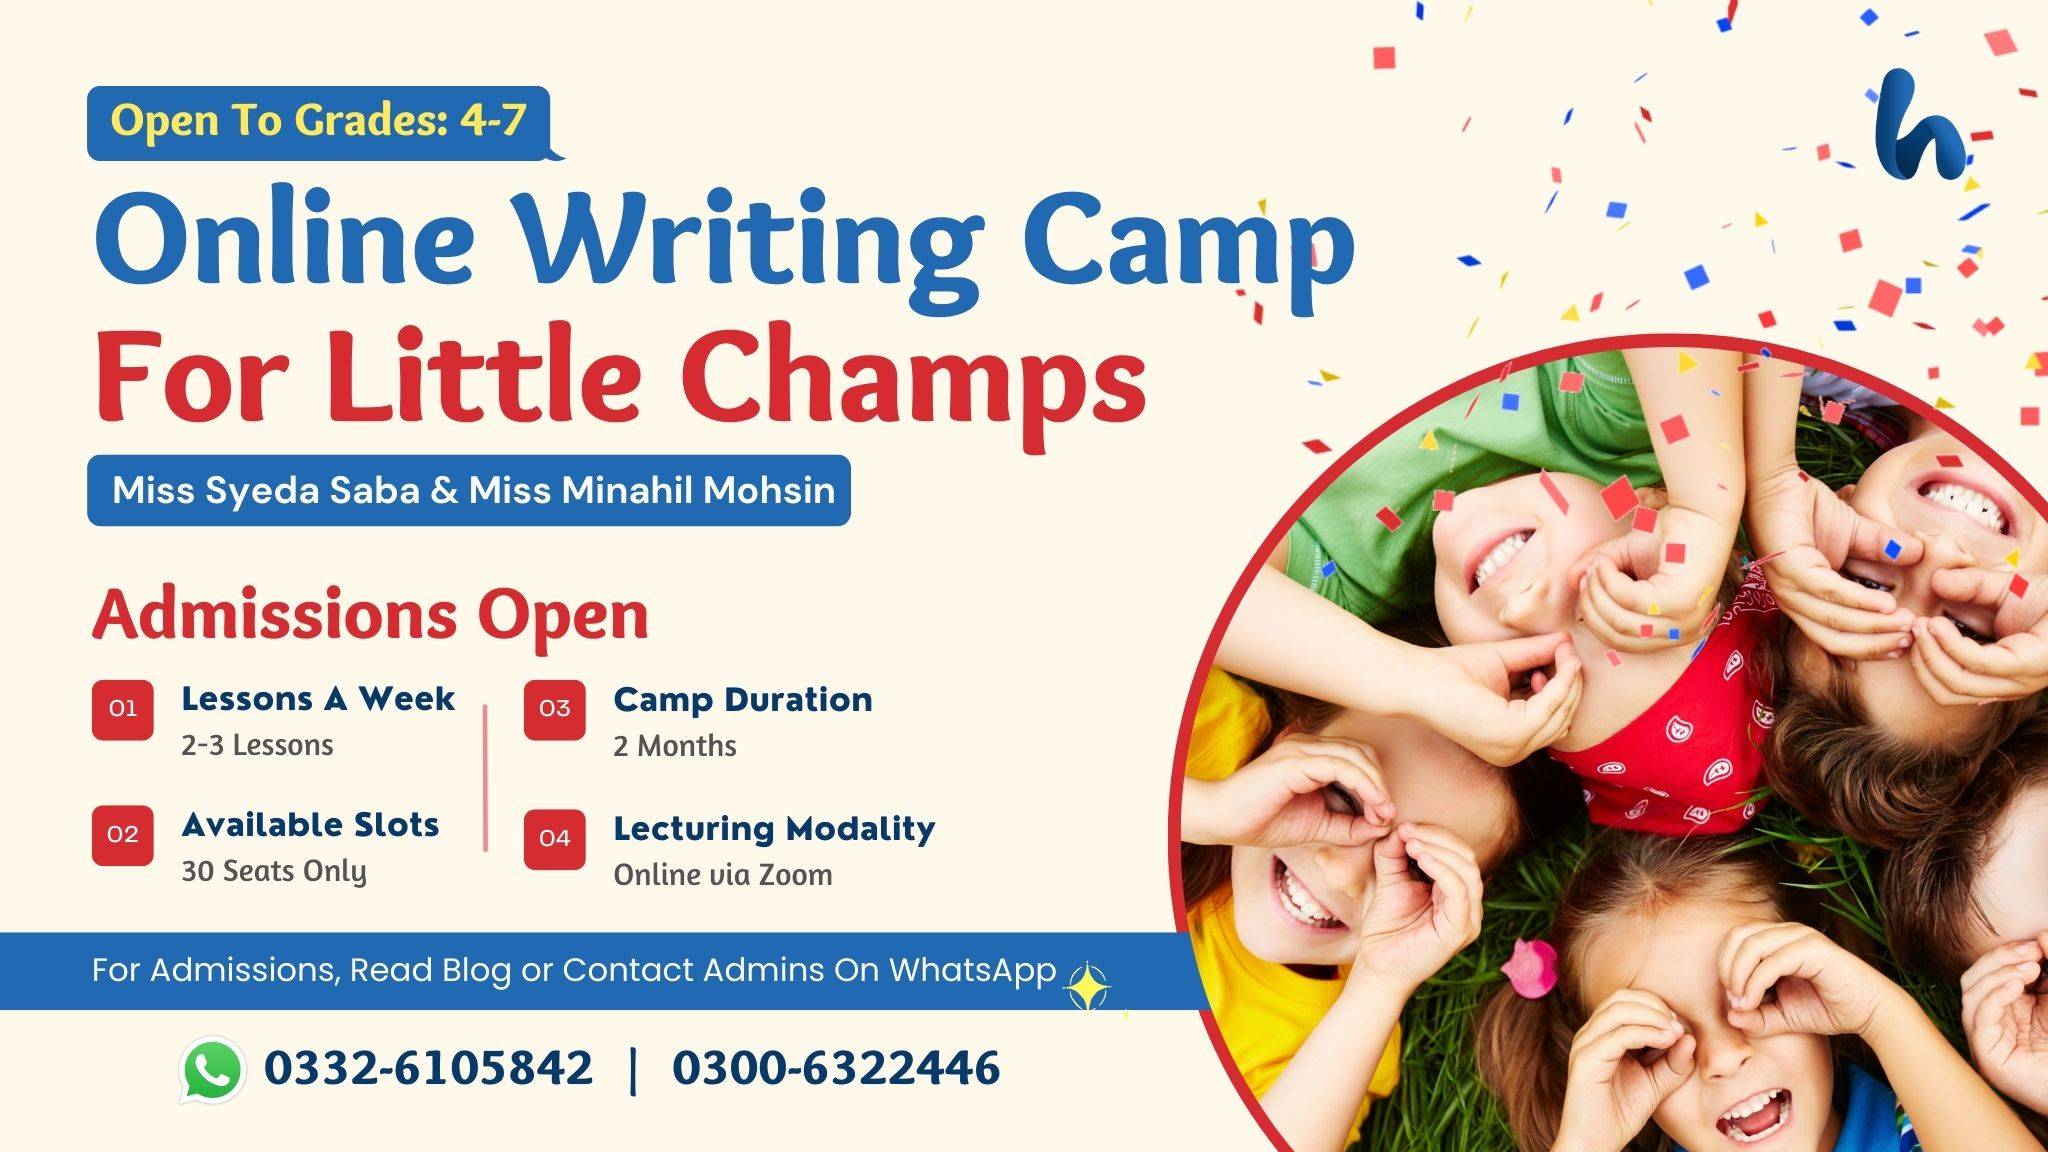 Online Writing Camp For Little Champs